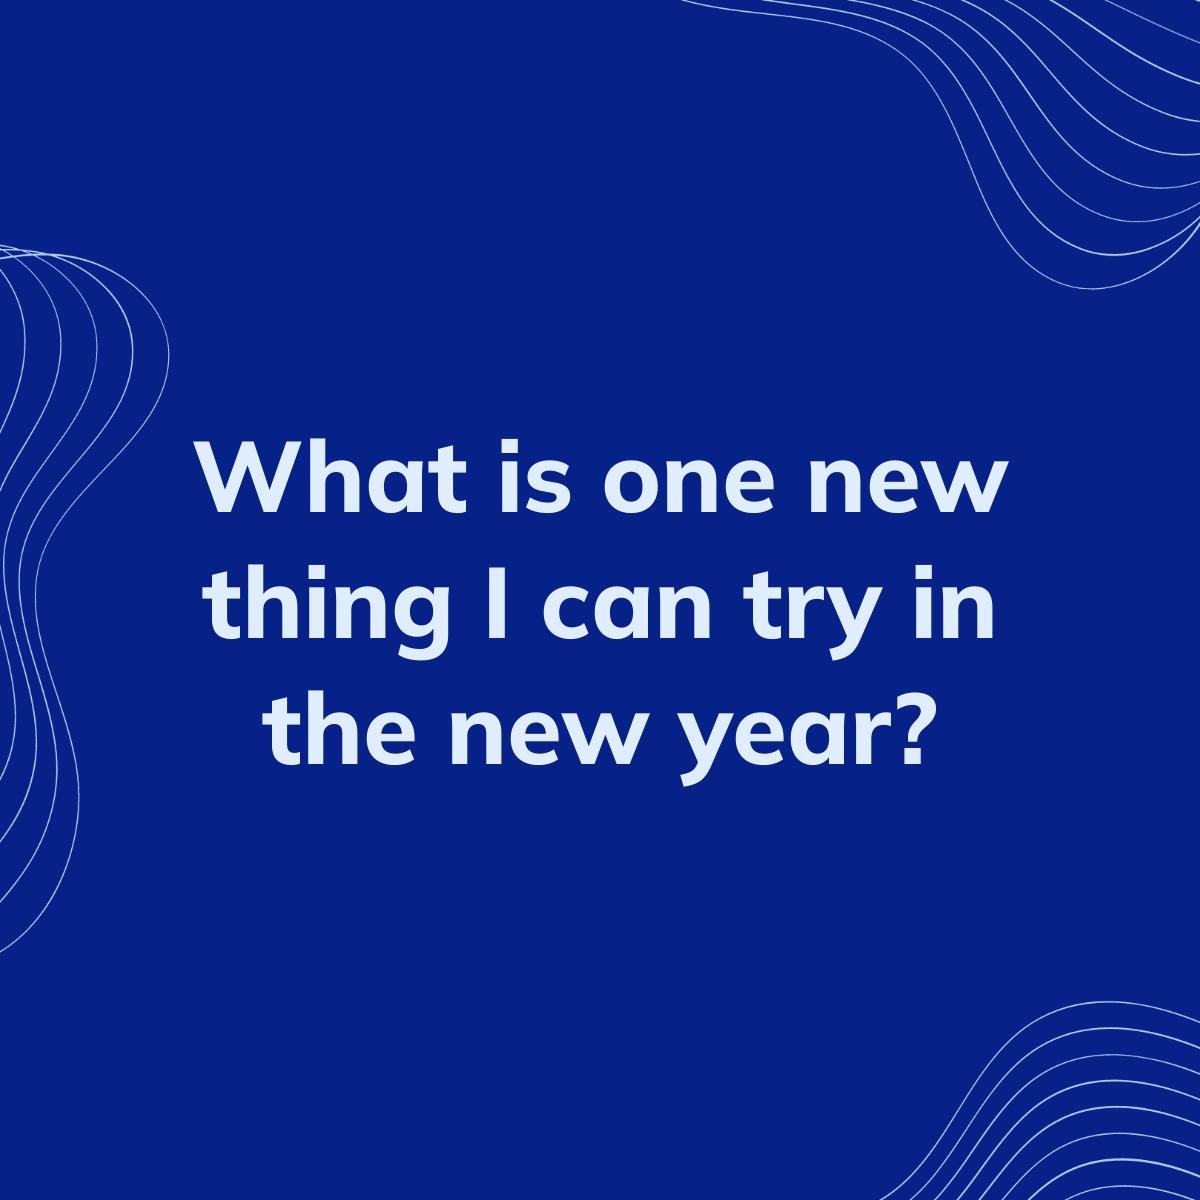 Journal Prompt: What is one new thing I can try in the new year?